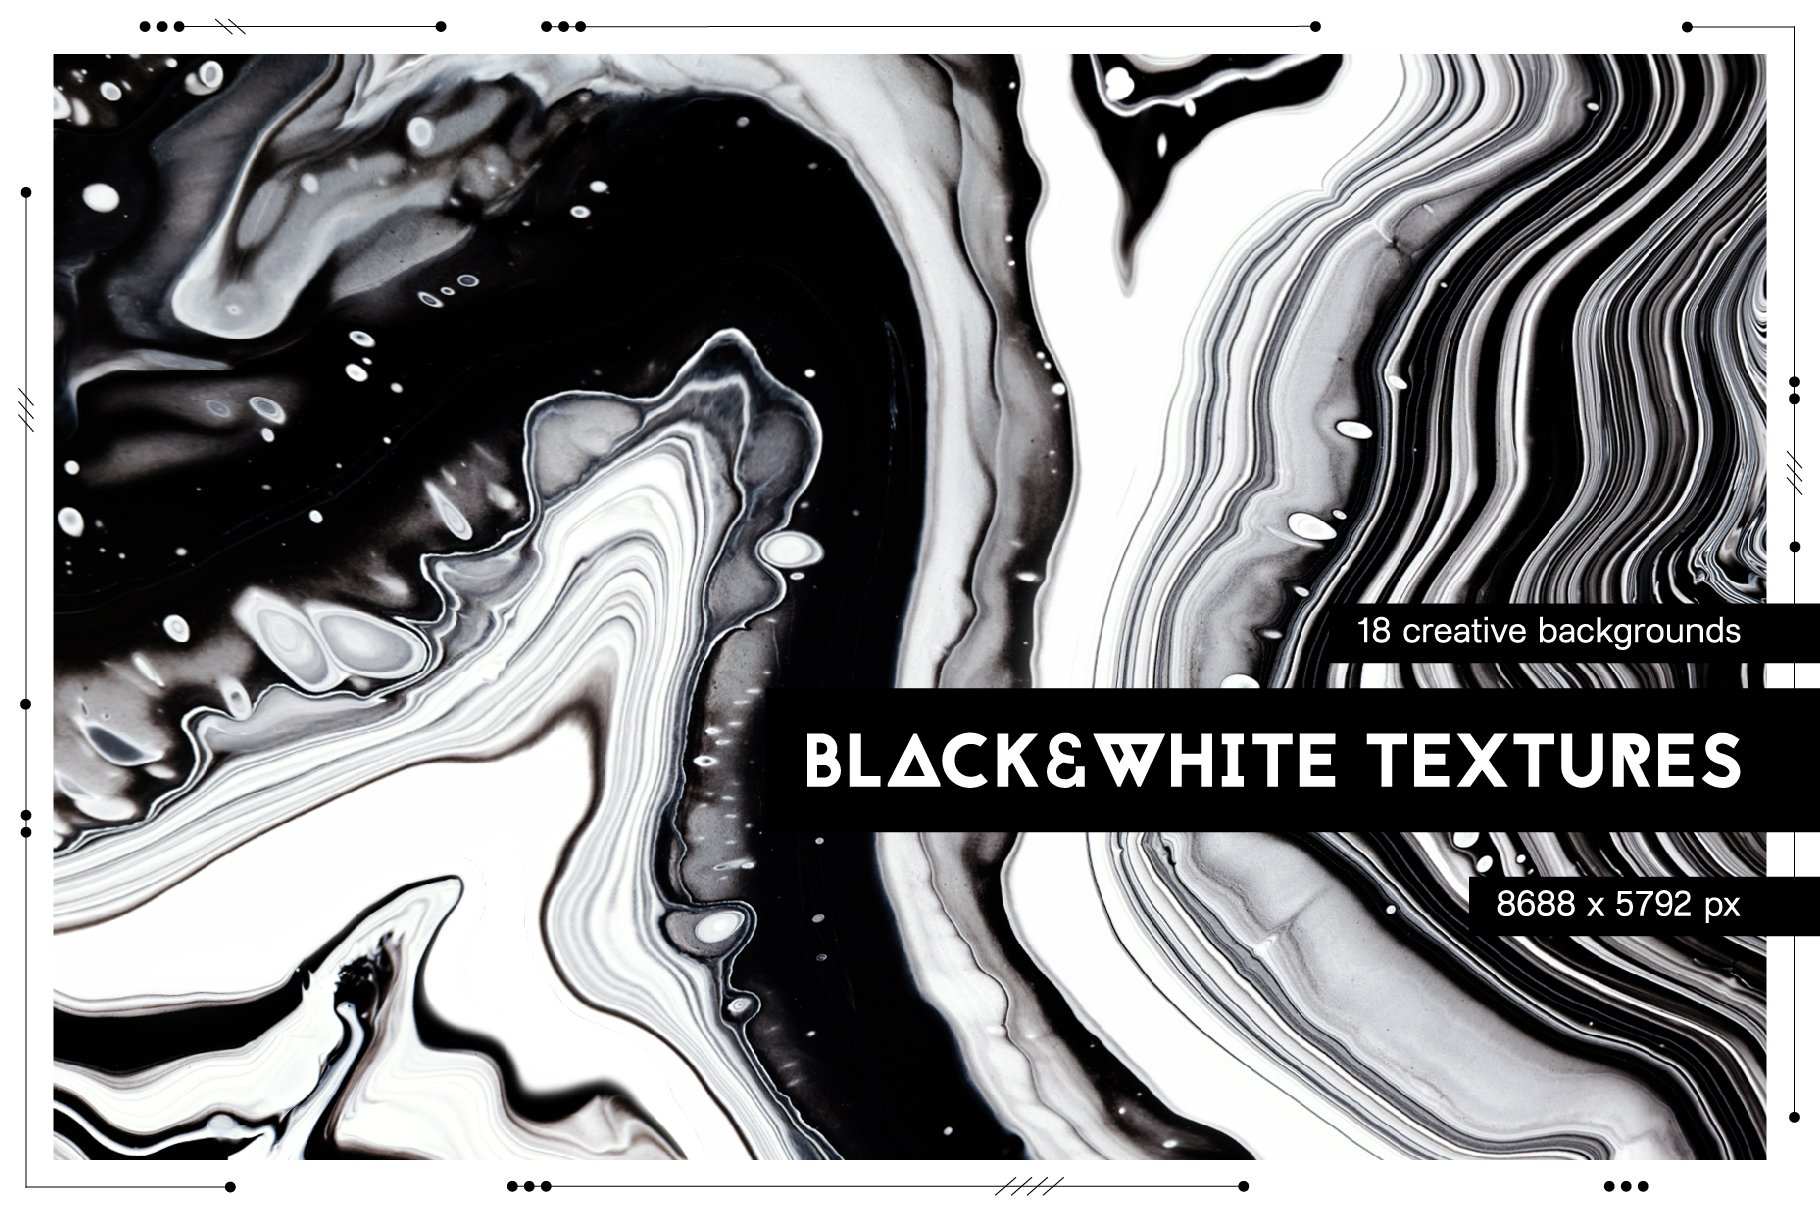 Black & White textures cover image.